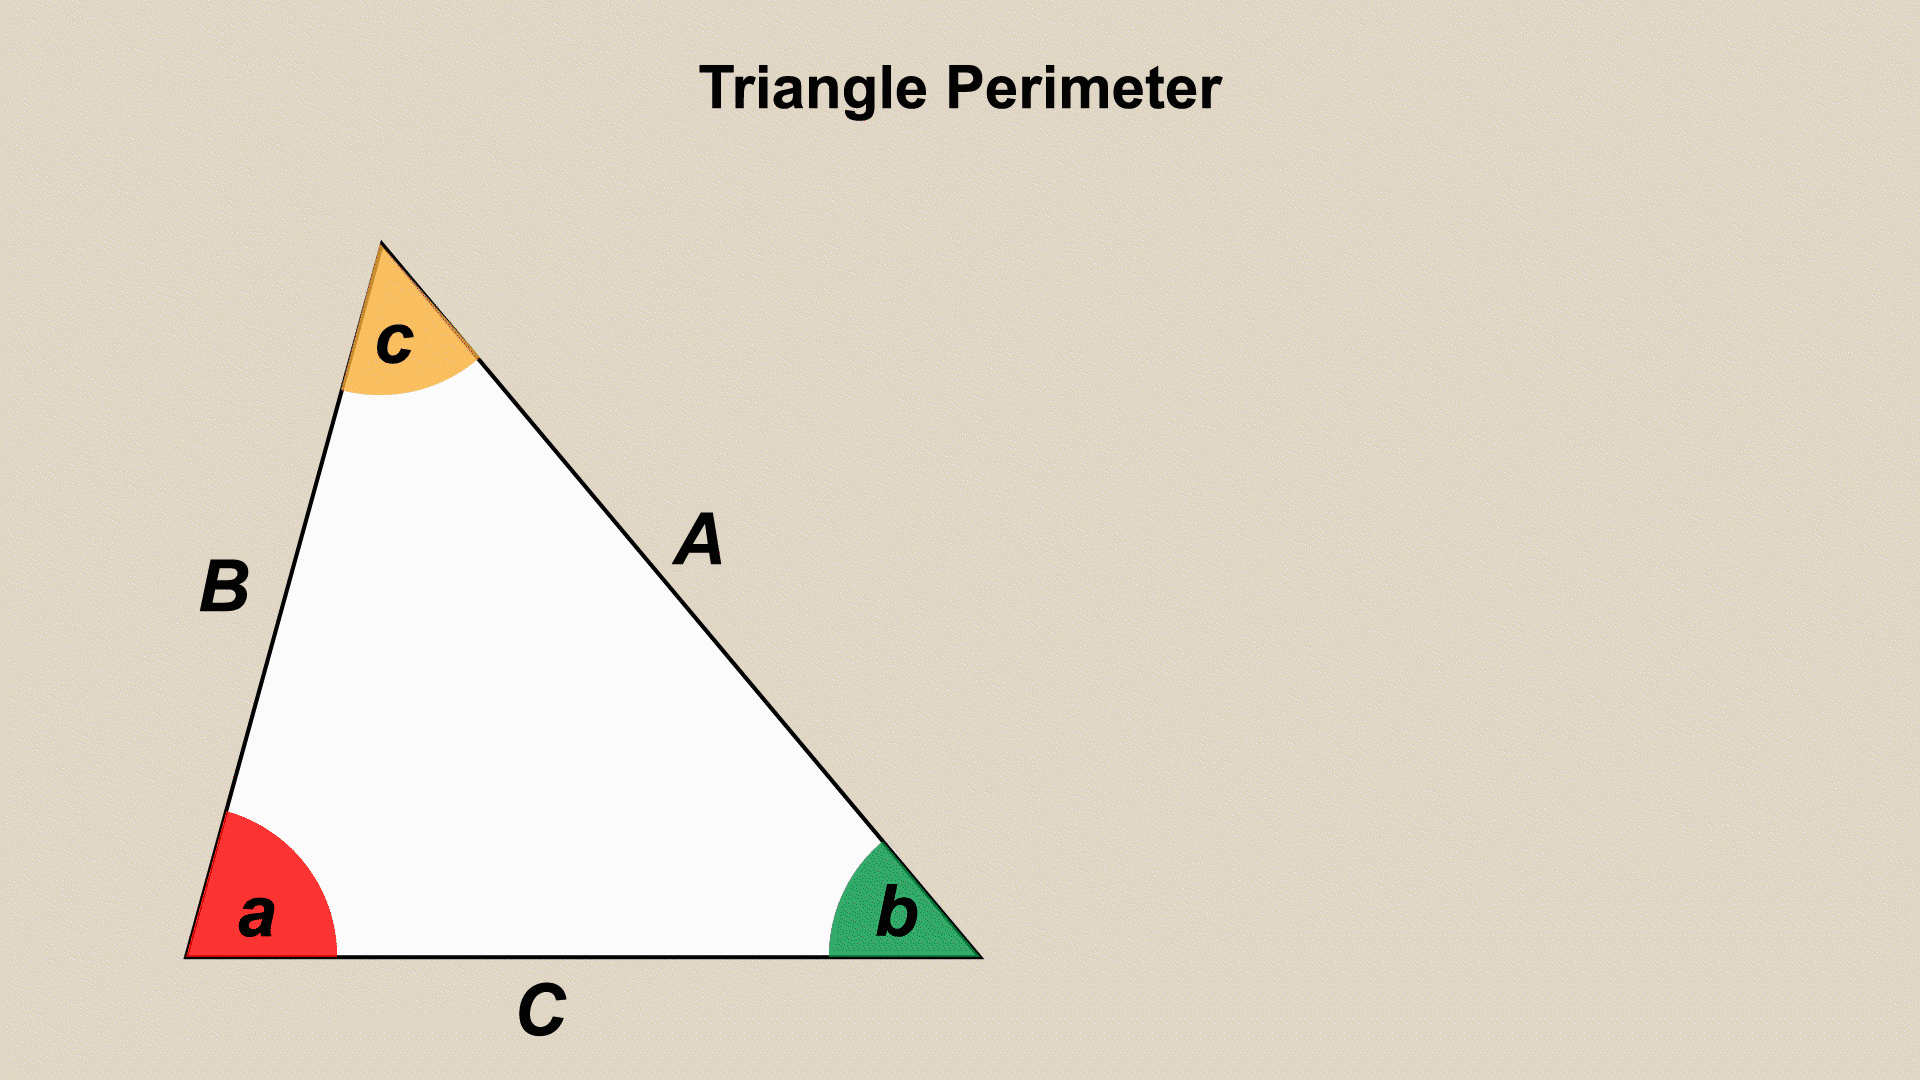 This piece of animated math clip art shows how to find the perimeter of a triangle.